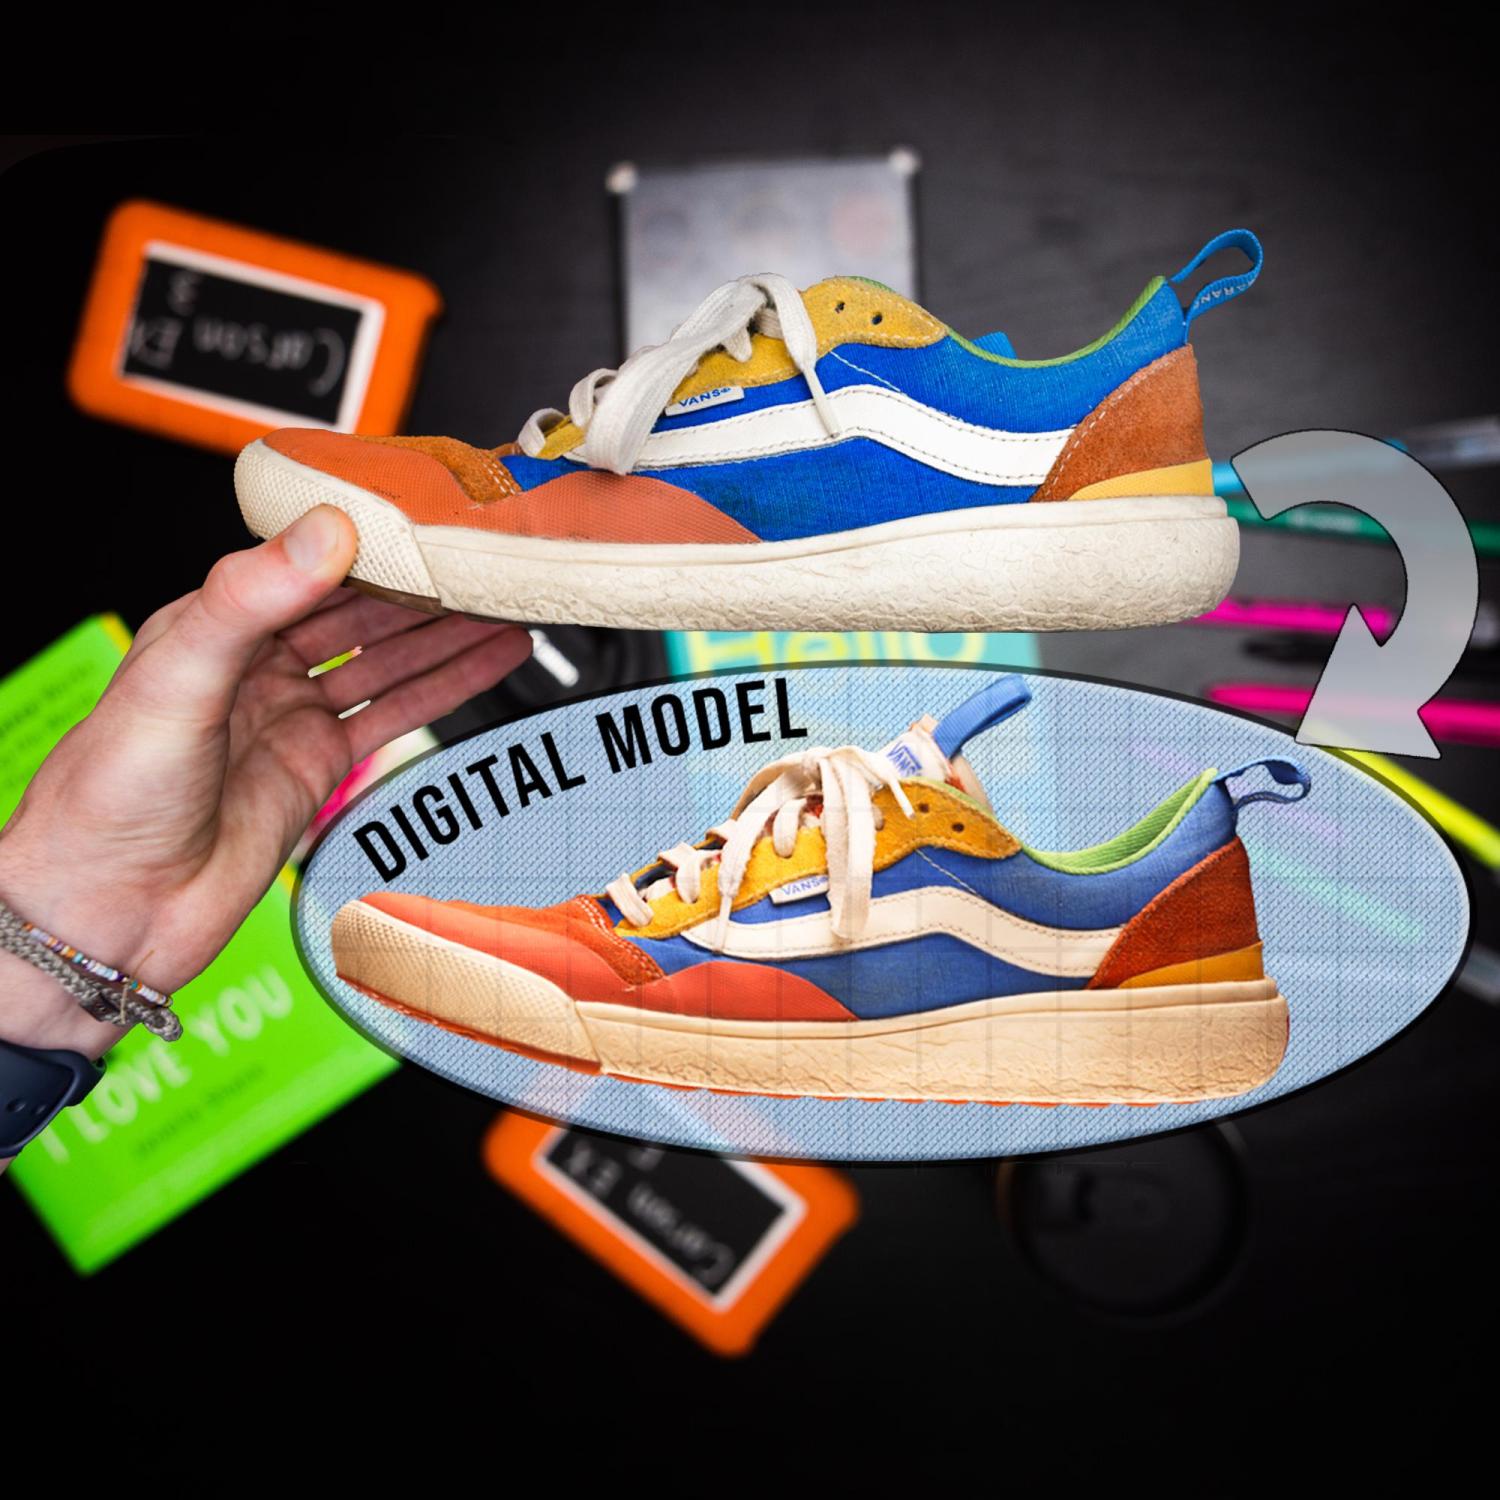 Photo showing a photo of the real shoe and the digital model side by side